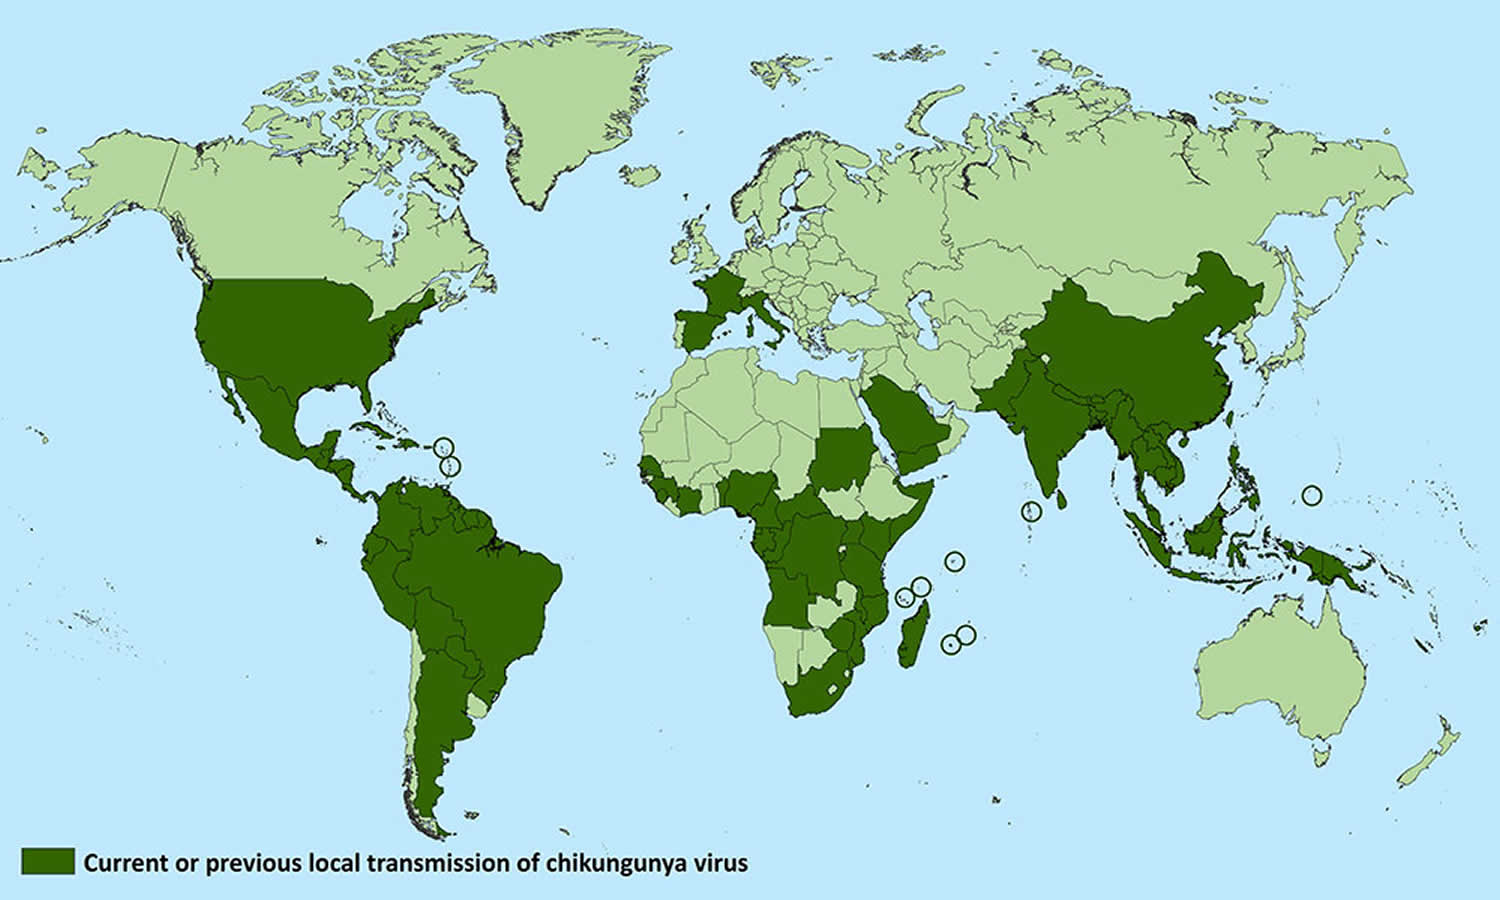 Countries and territories where chikungunya cases have been reported